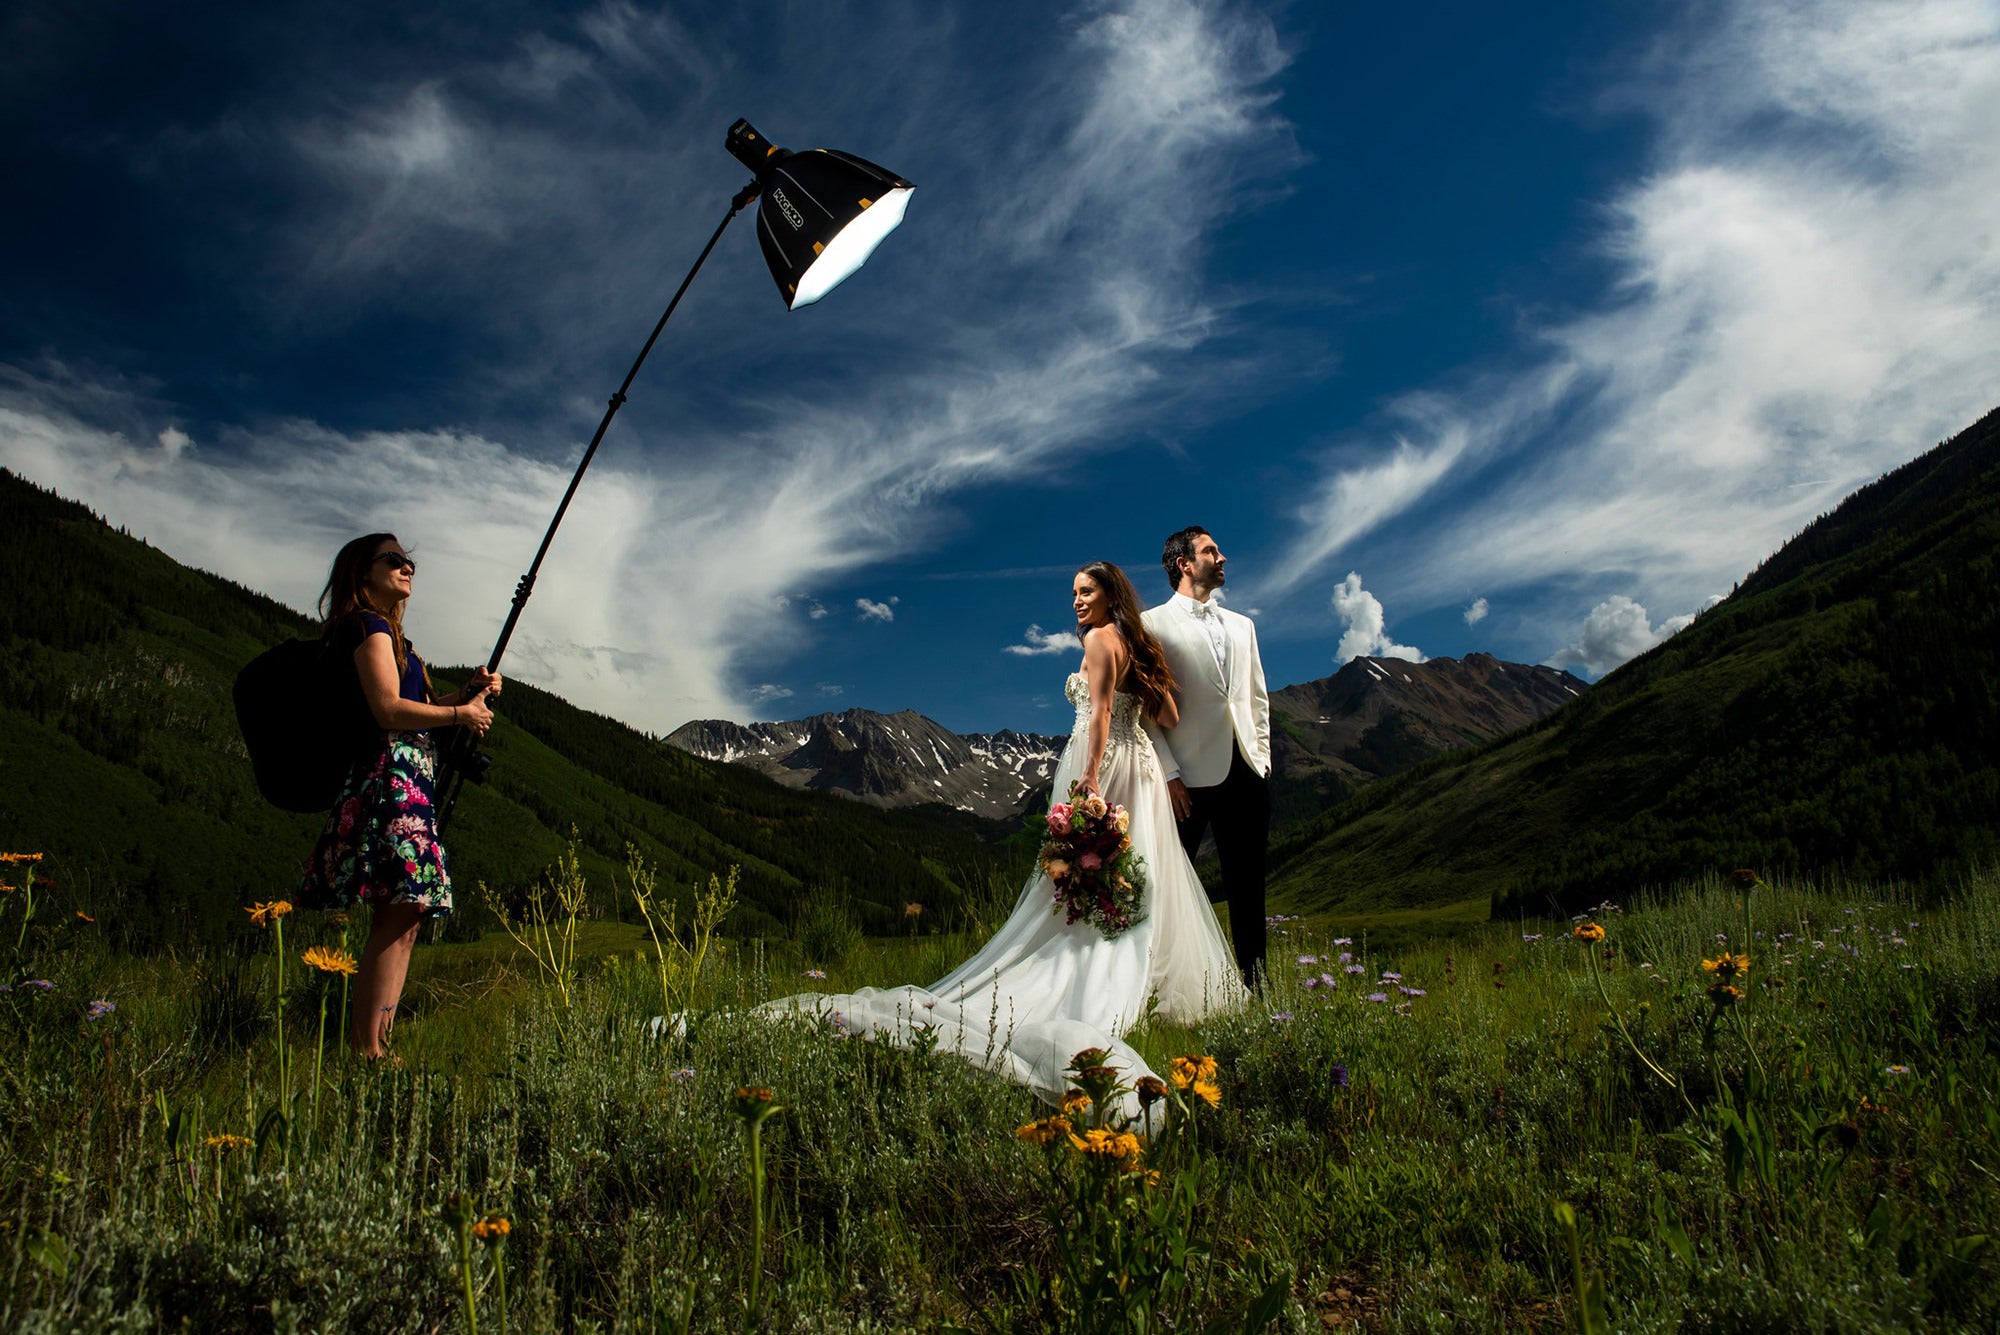 Flash Diffusers & Light Modifiers for Speedlites – MagnetMod